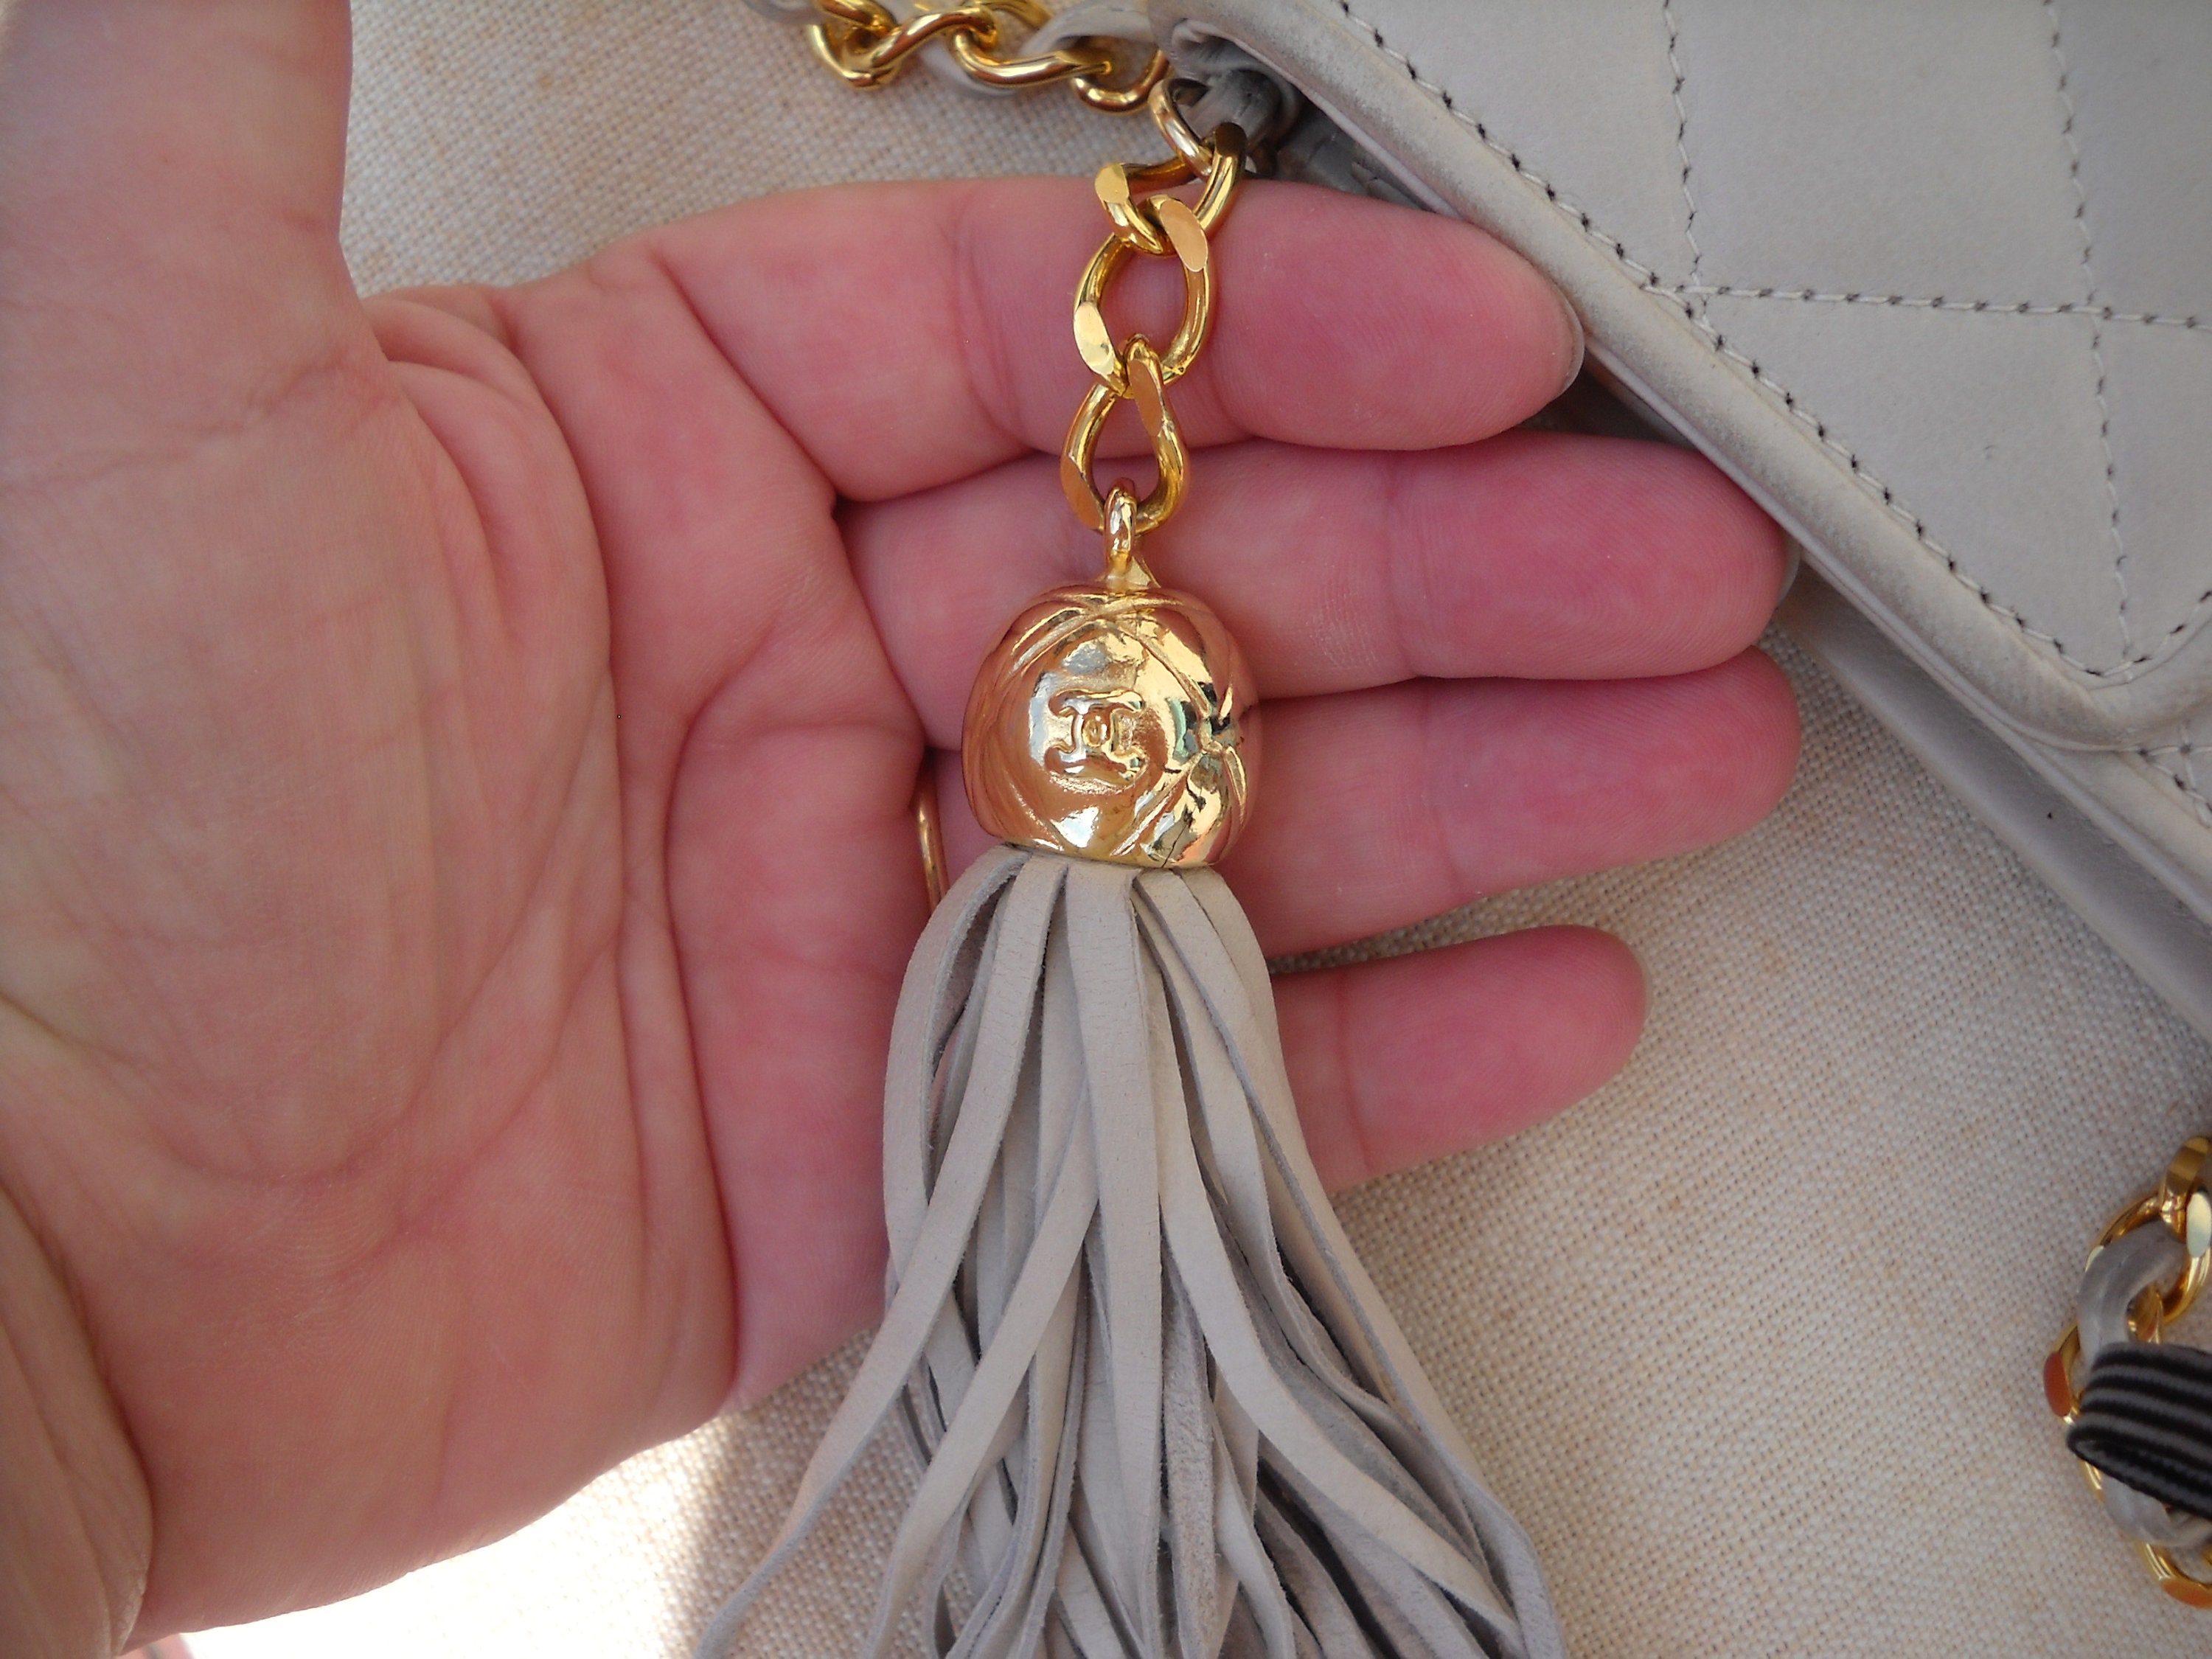 CHANEL Vintage Cream Lambskin Bag Chain Strap Made in France -  Canada